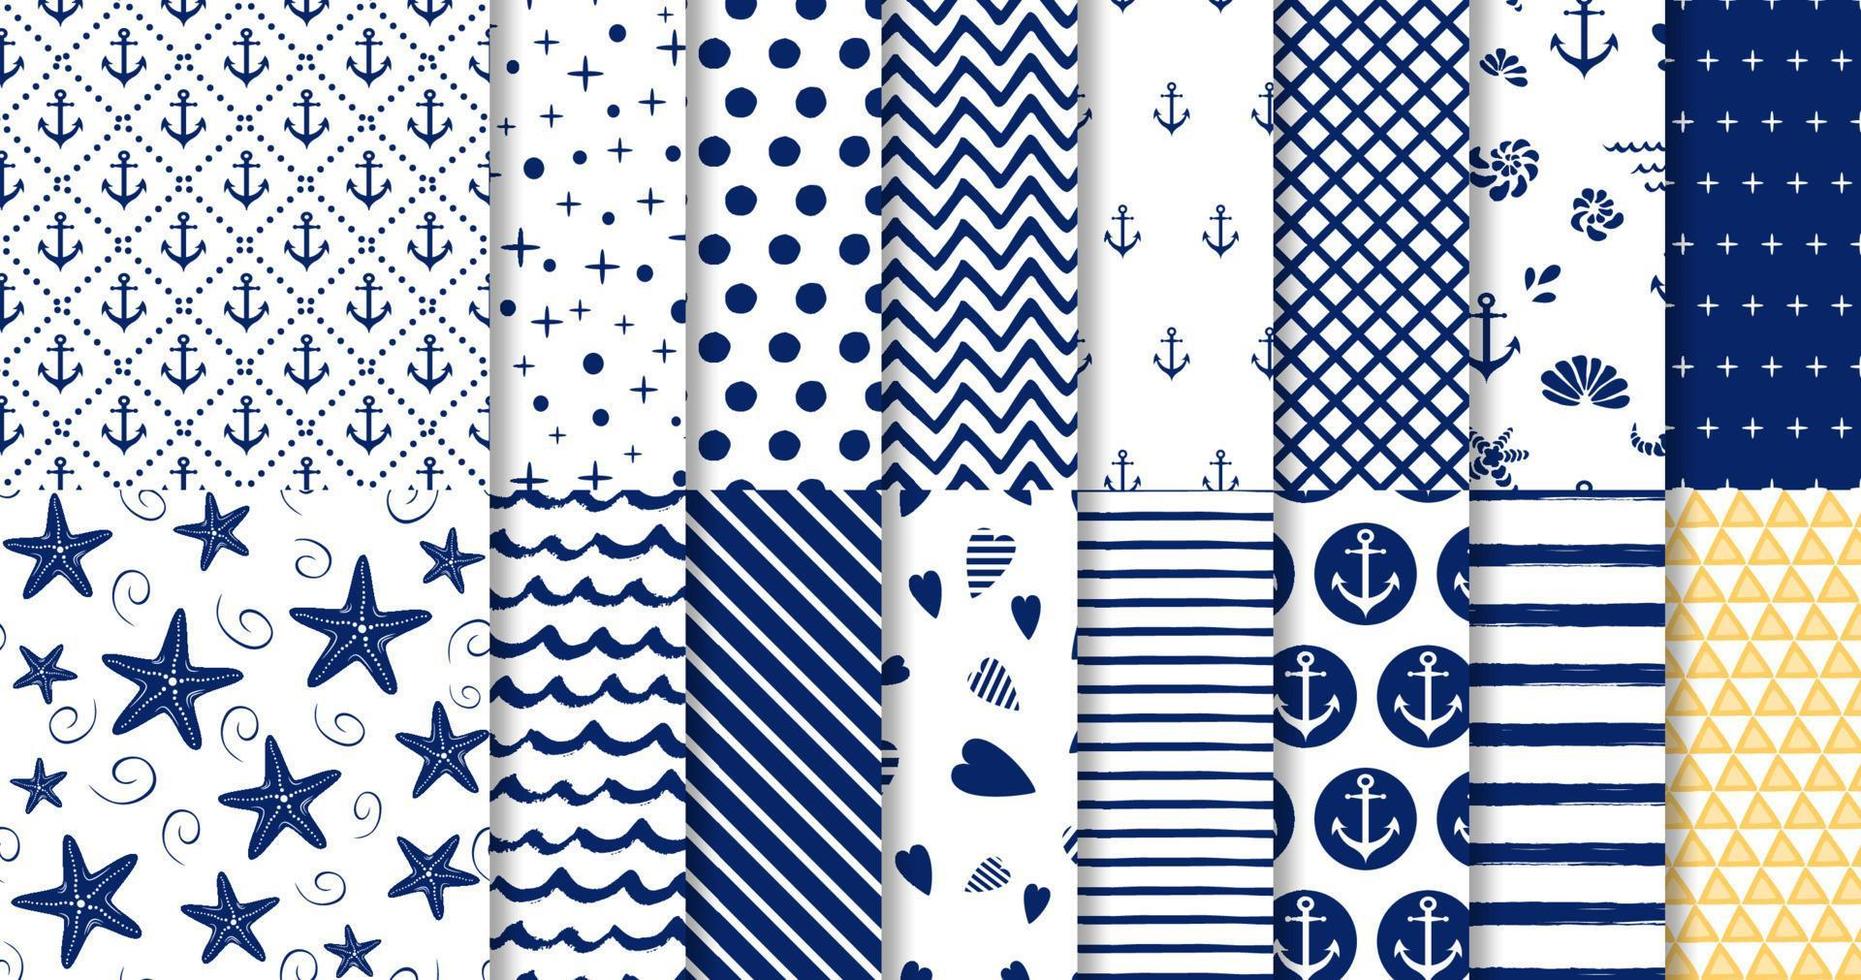 Set of marine and nautical backgrounds in navy blue and white colors. Sea theme. Elegant seamless patterns collection. Geomteric templates Striped blue patterns Vector illustration.